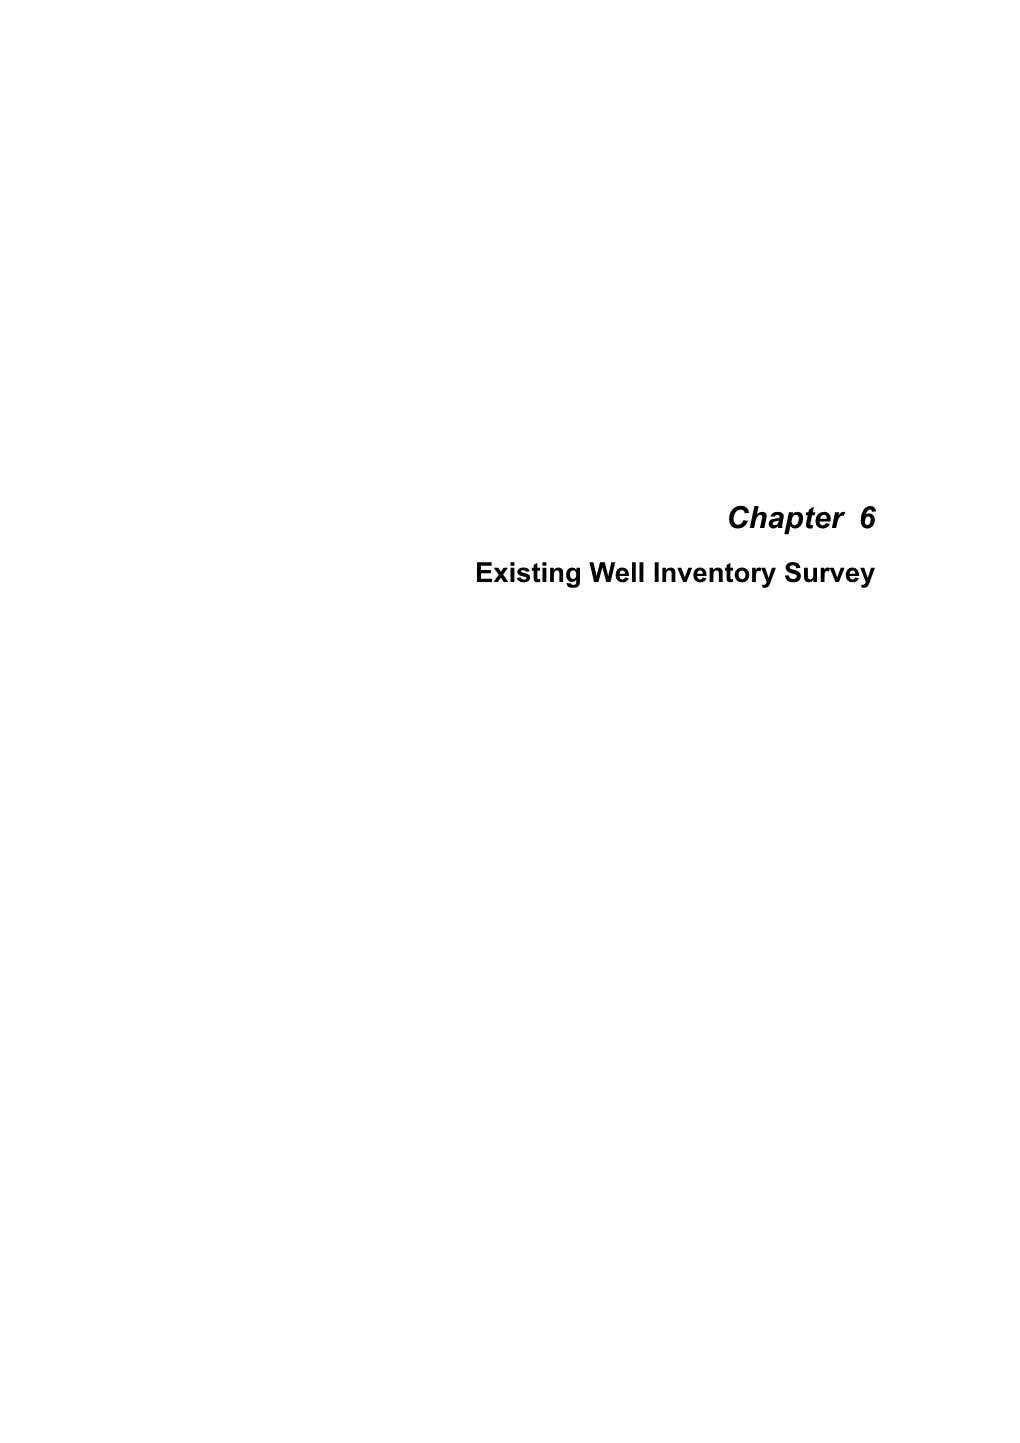 Chapter 6 Existing Well Inventory Survey